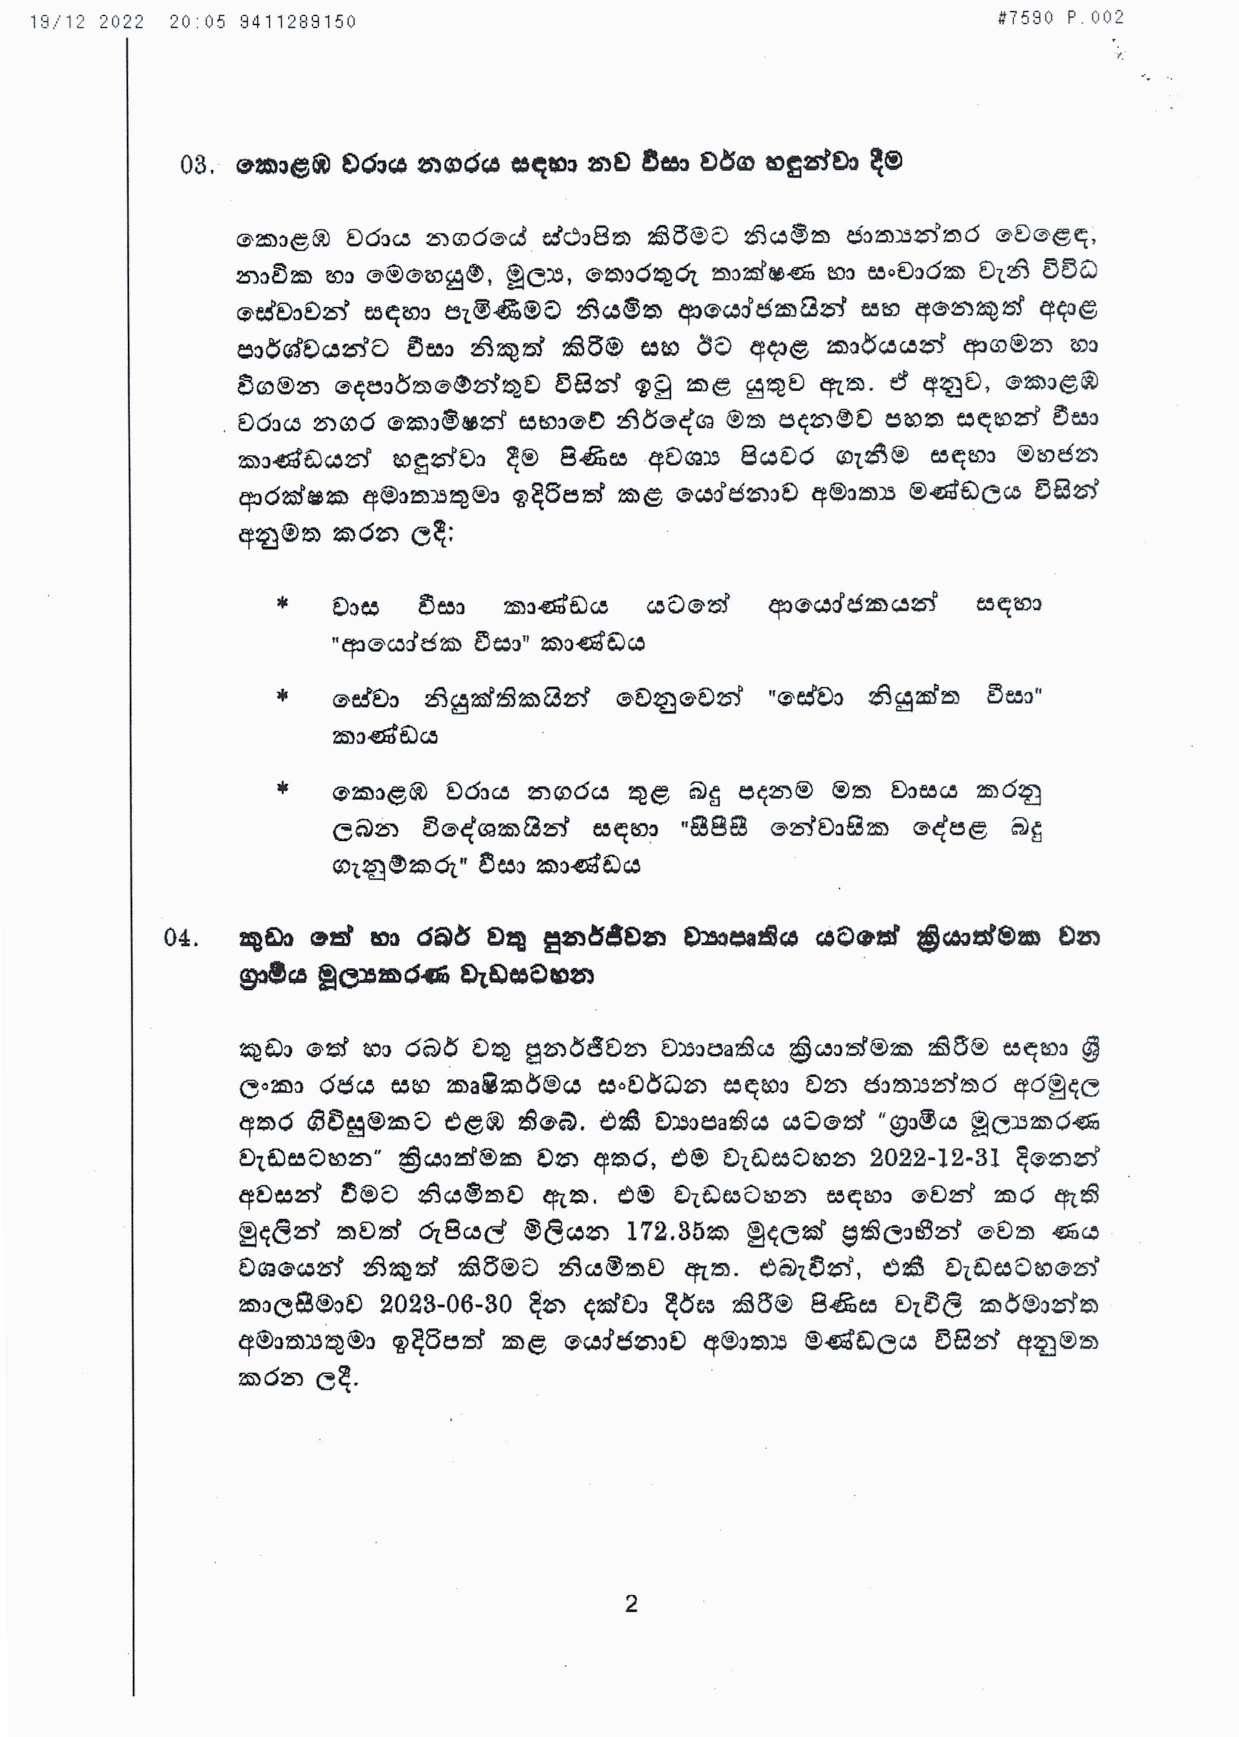 Cabinet Decisions on 19.12.2022 S page 002